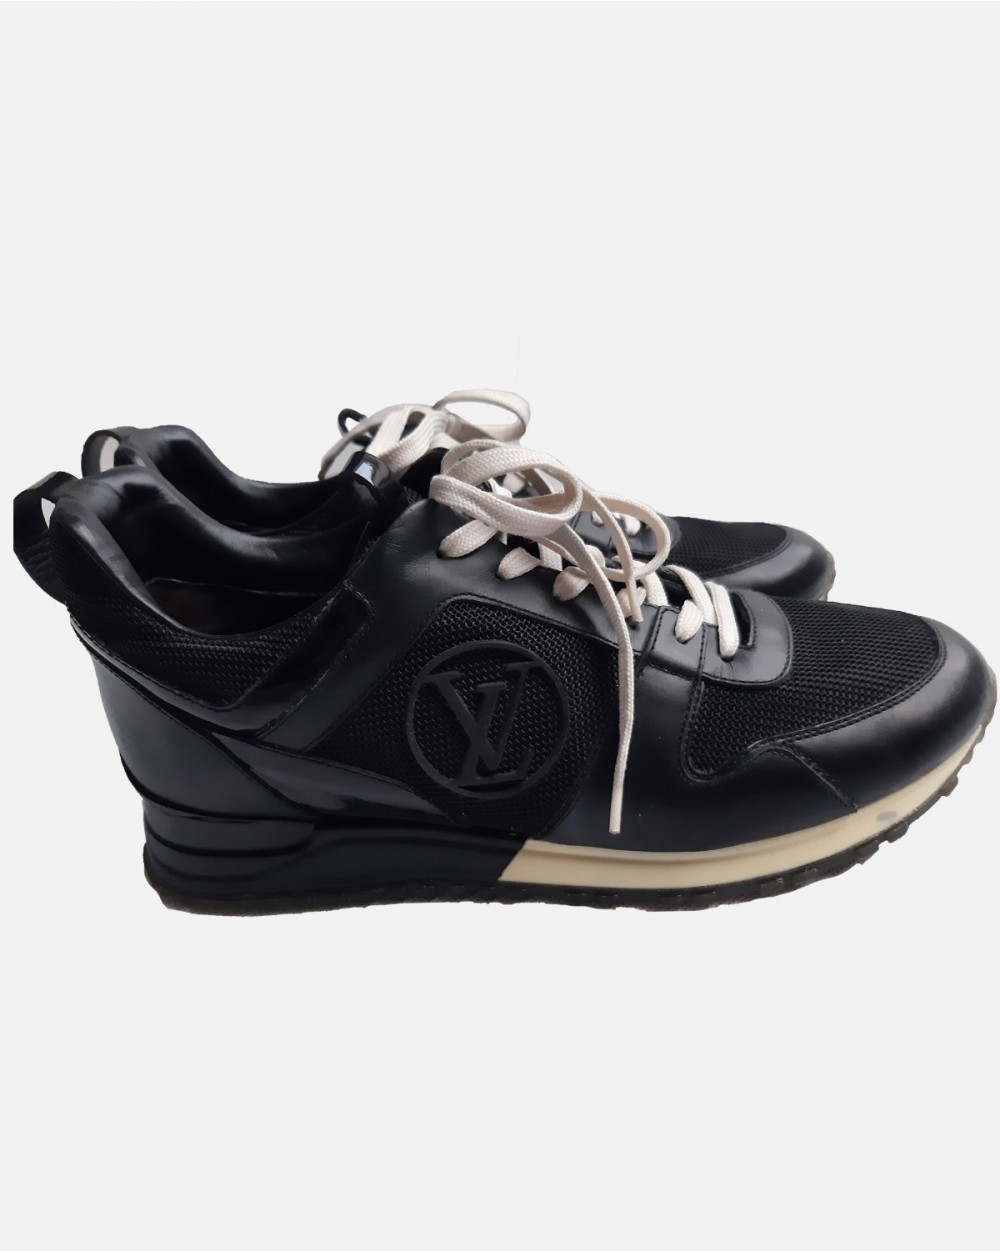 Louis Vuitton - Authenticated Run Away Trainer - Leather Black for Women, Good Condition